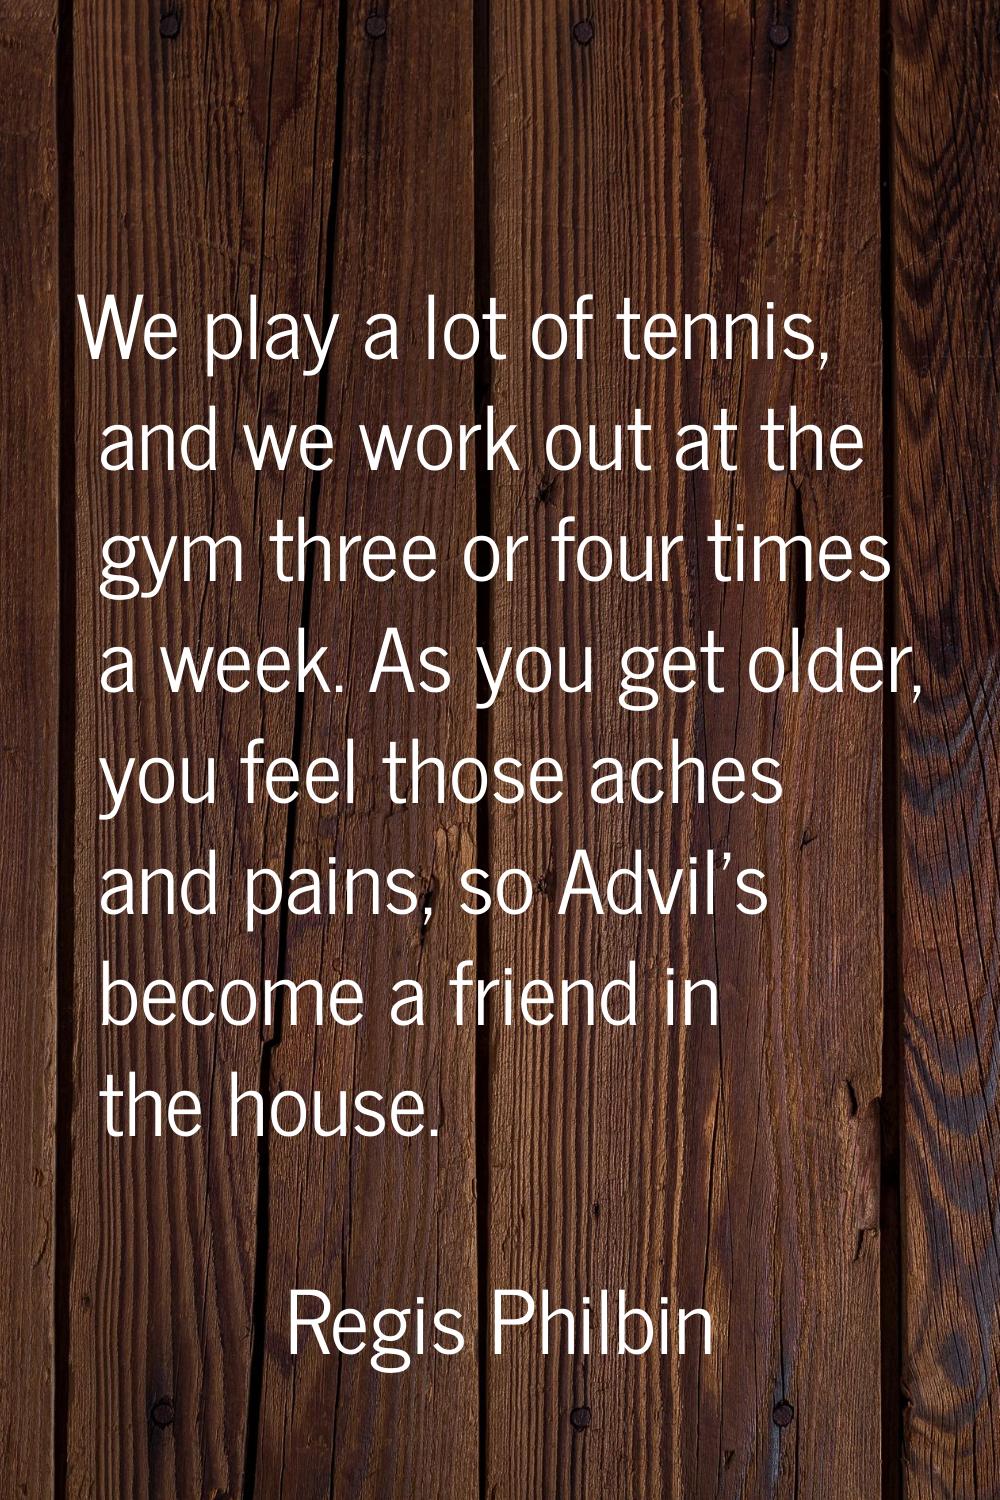 We play a lot of tennis, and we work out at the gym three or four times a week. As you get older, y